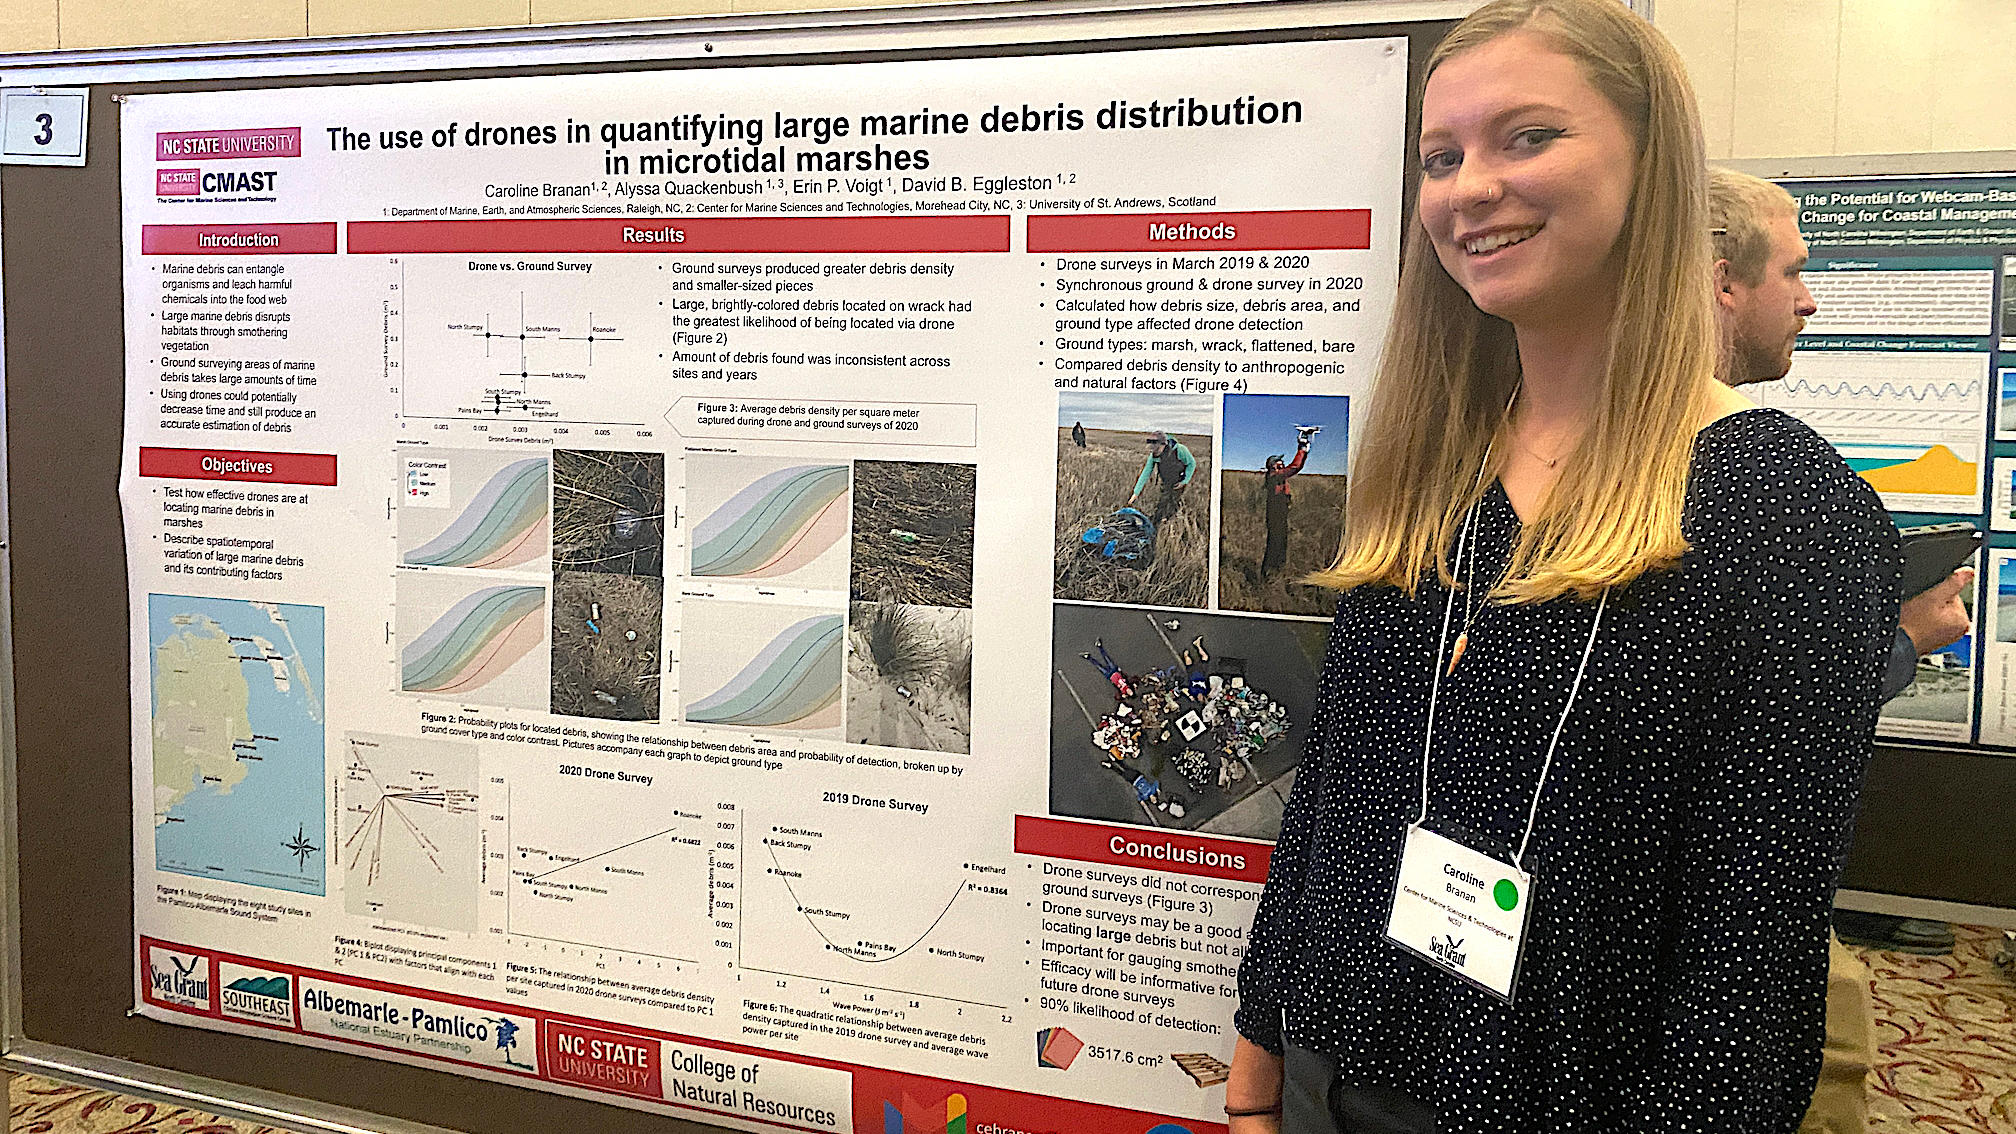 Caroline is pictured here with her poster at the @ncseagrant conference.